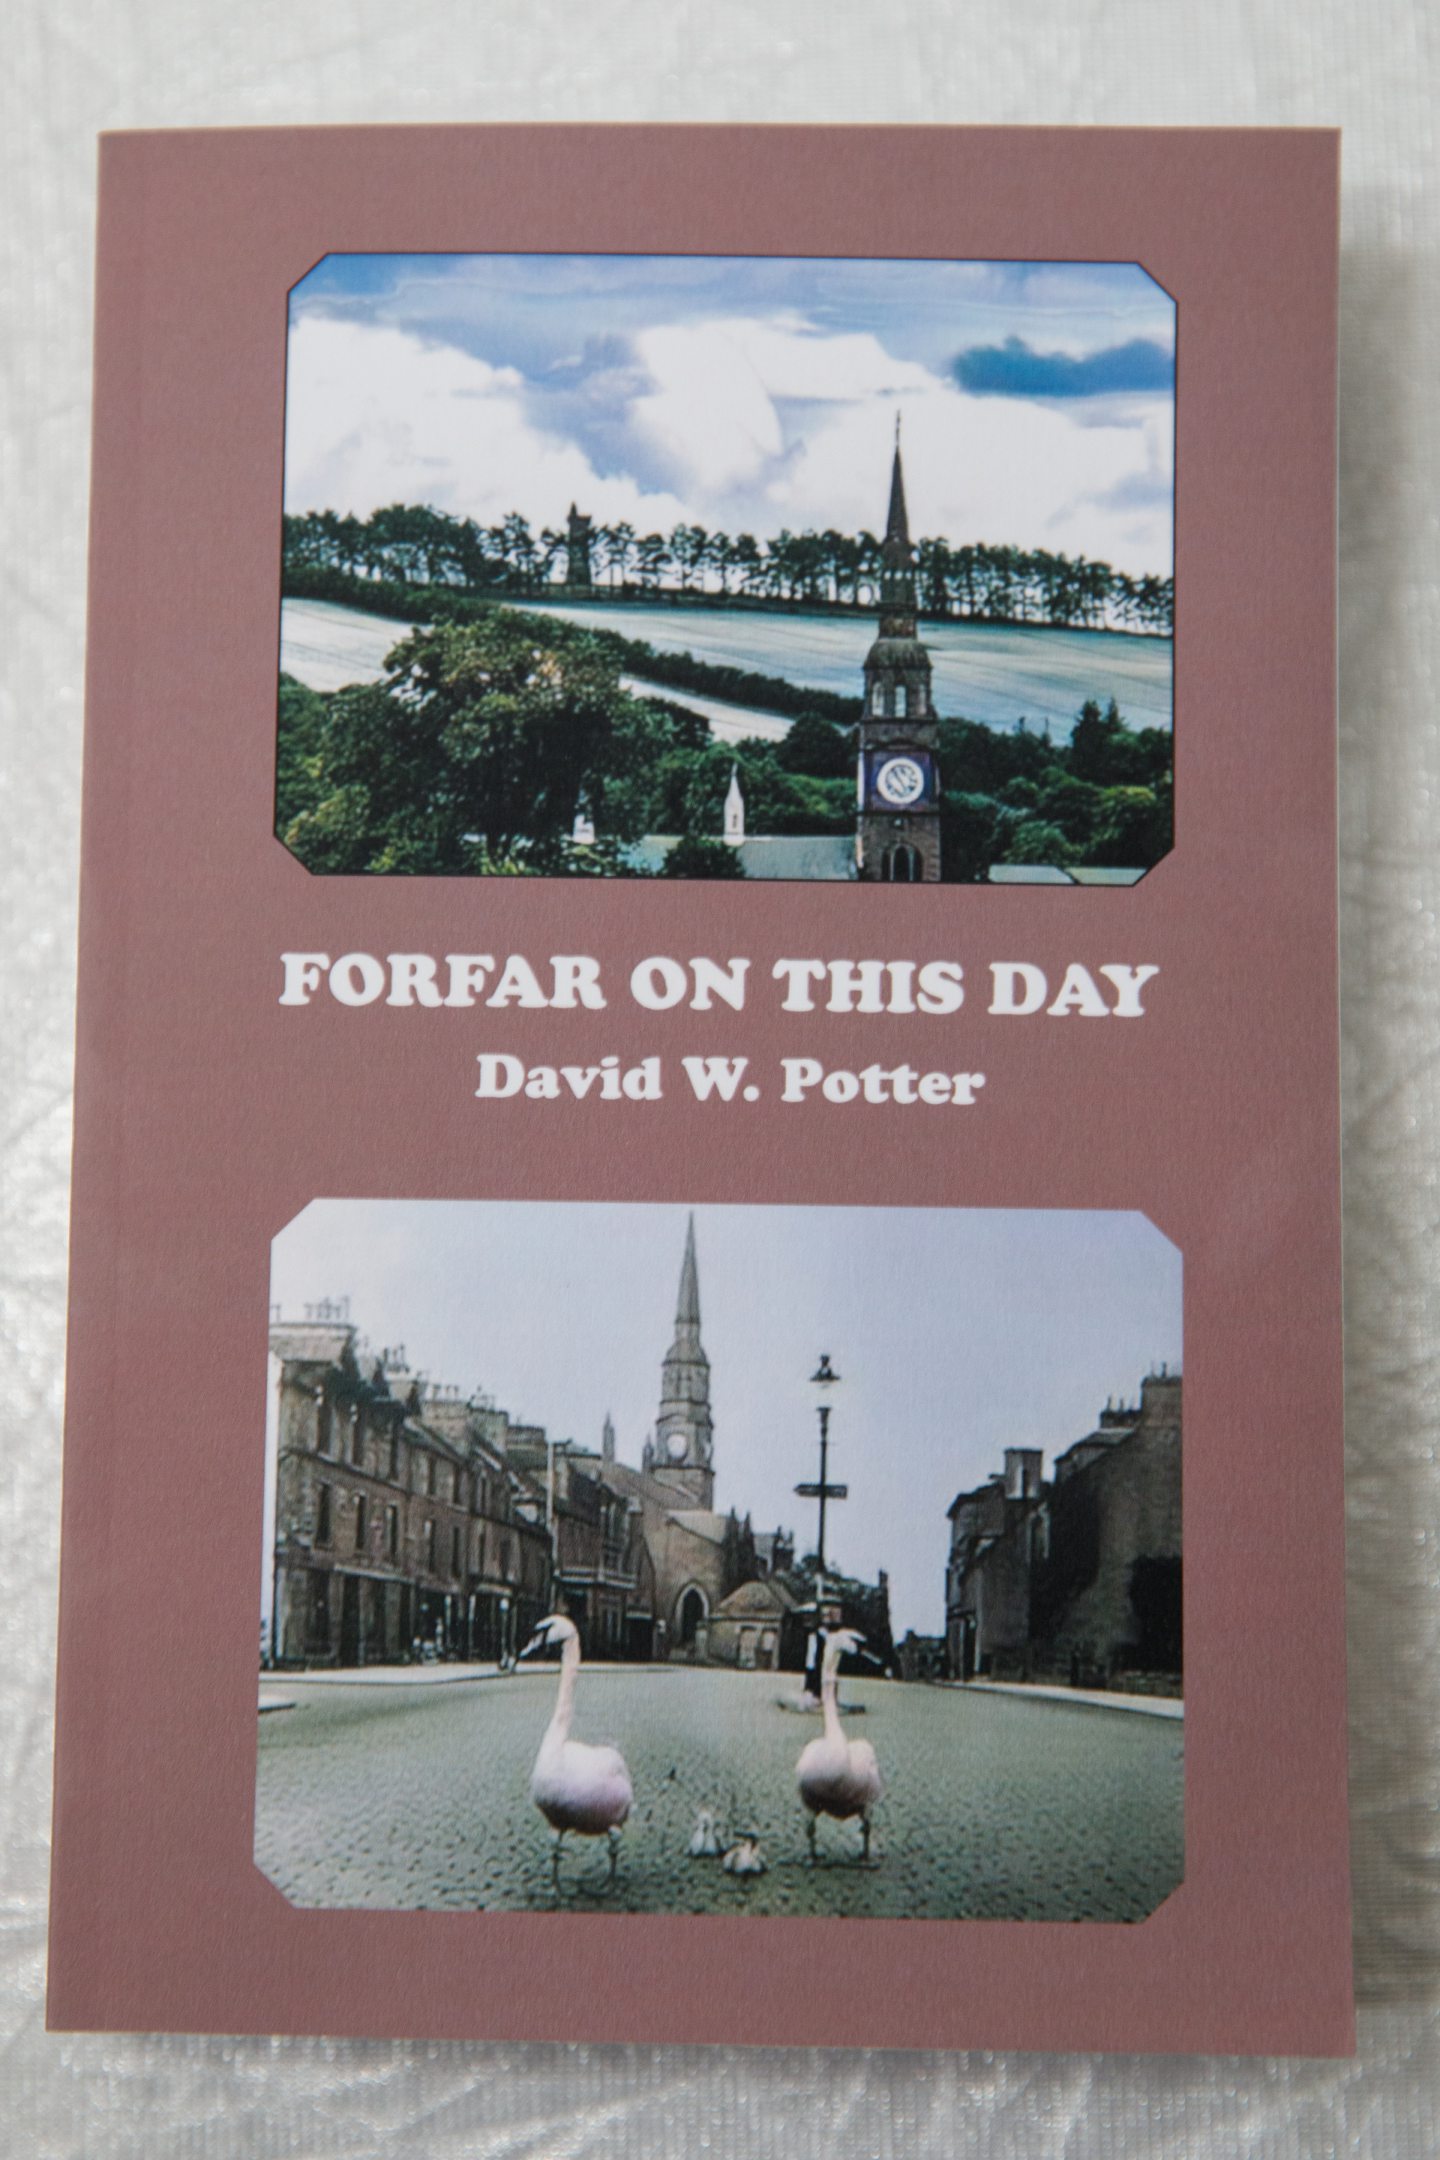 The new book is the latest work from David Potter.